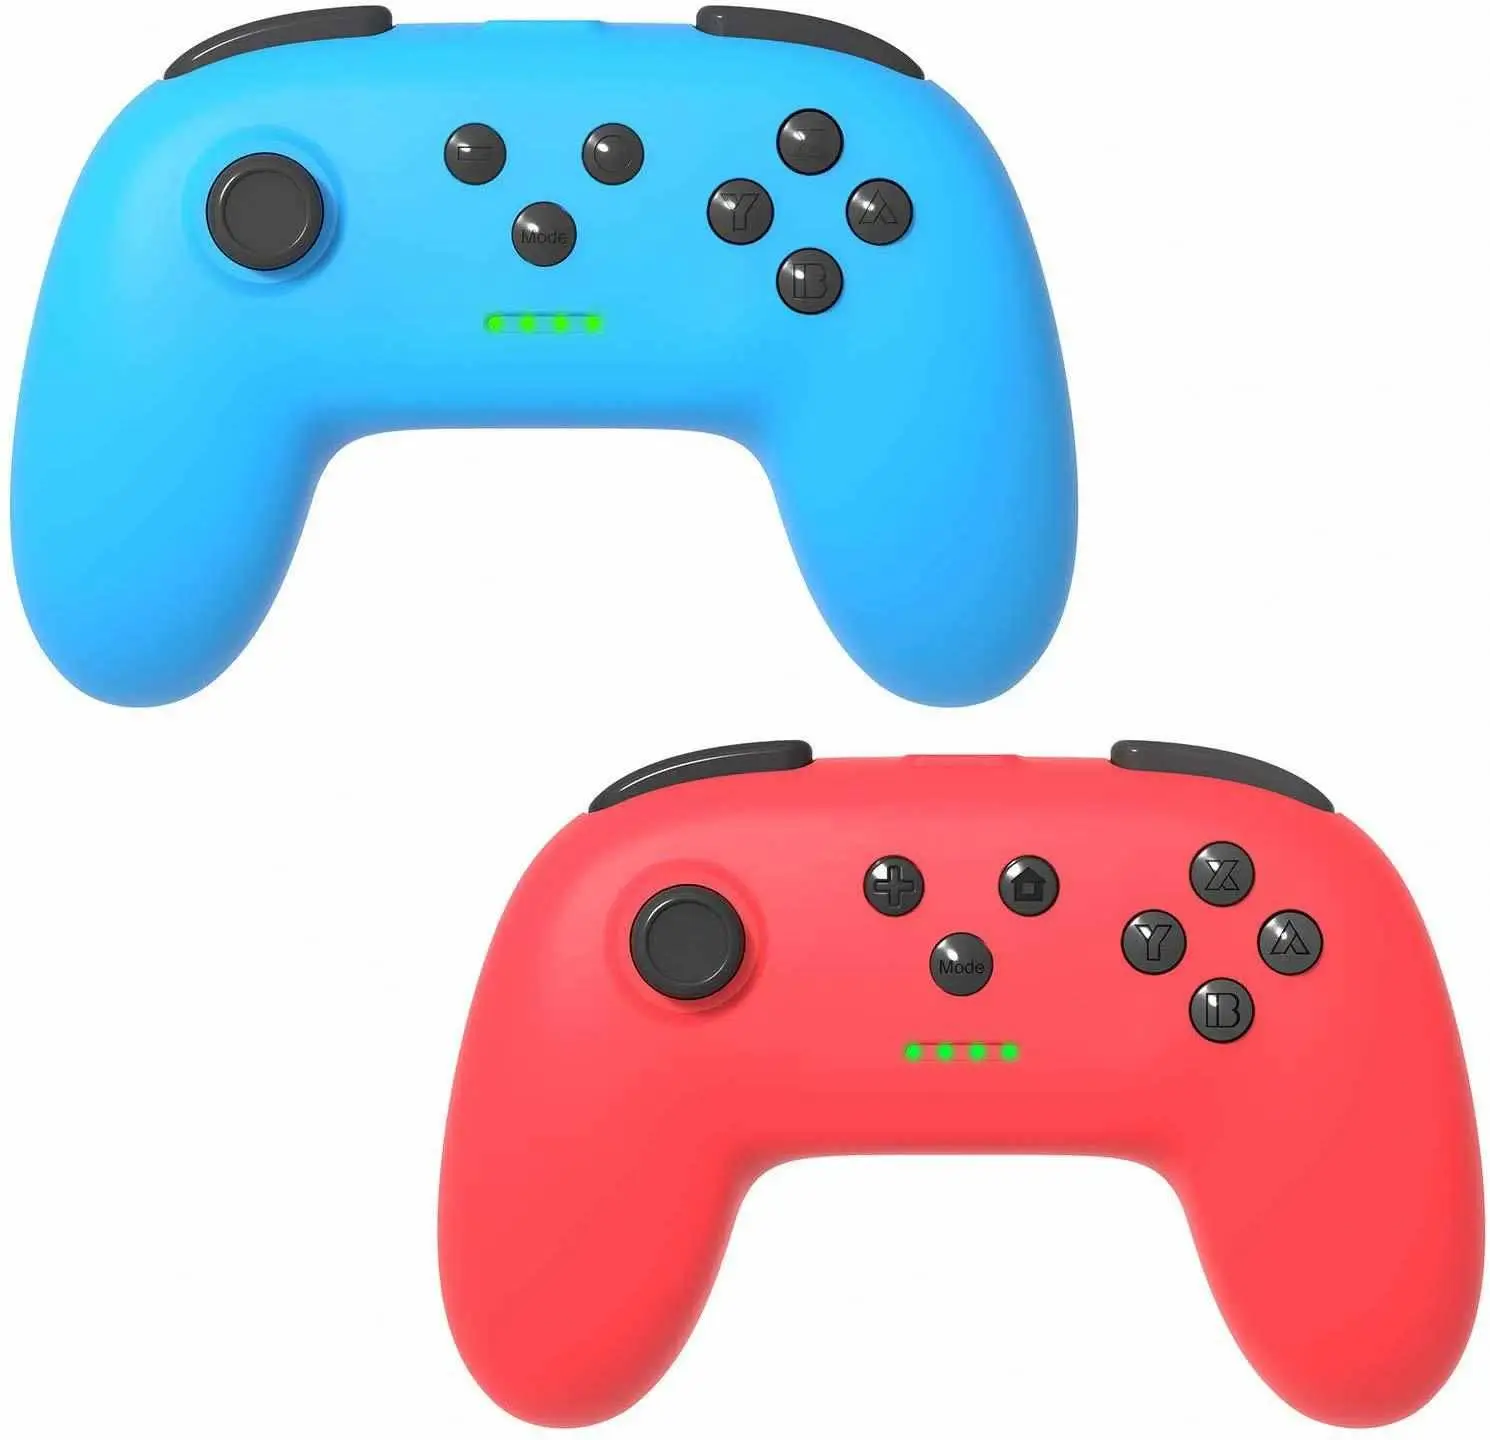 

A Pair of Switch Pro Wireless Gamepads Simple Joysticks Controllers For NS